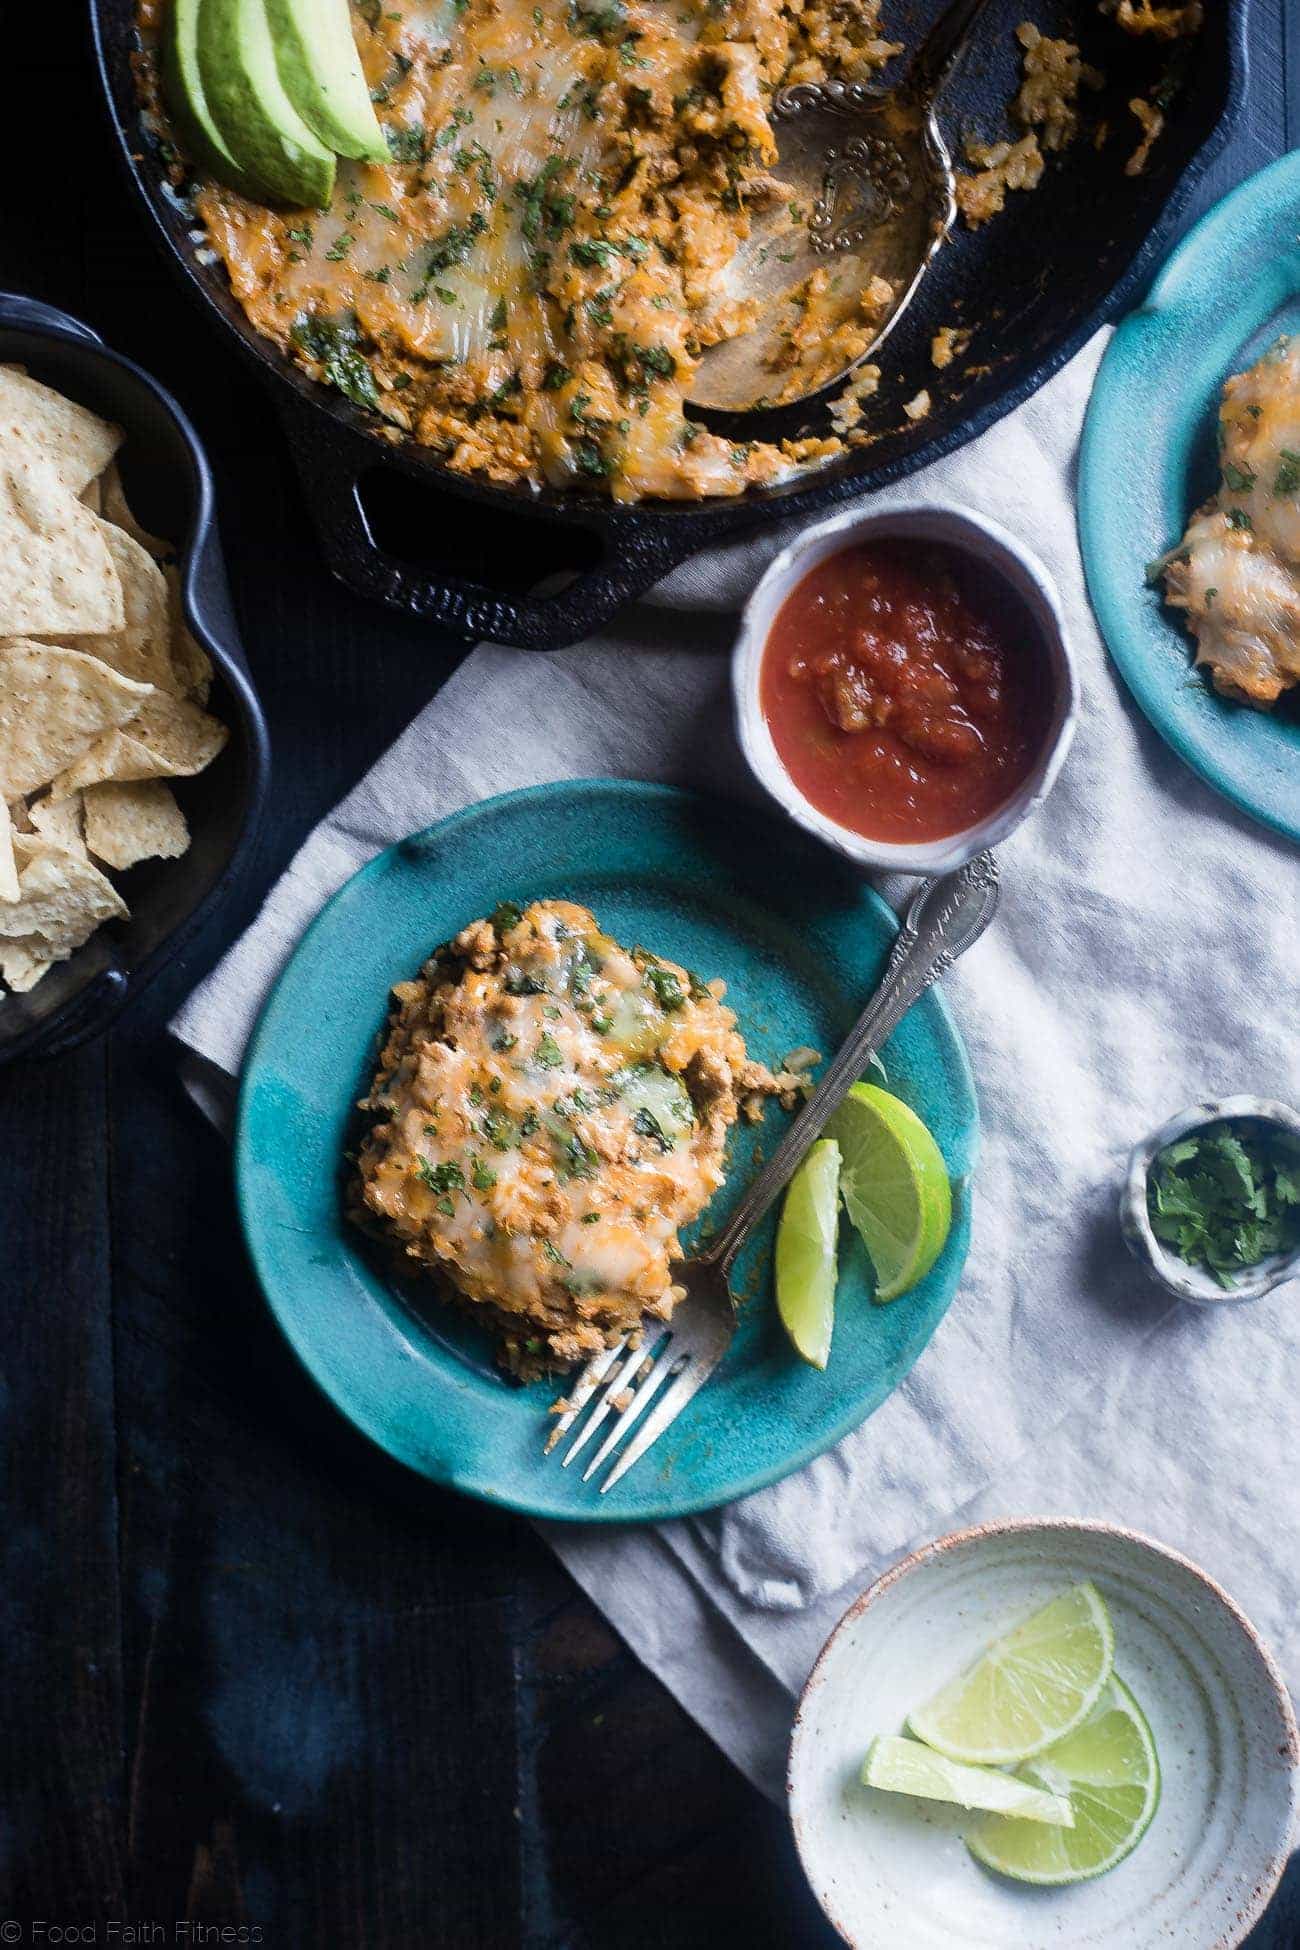 One Pot Mexican Chicken Rice Casserole - This chicken Mexican rice casserole uses sweet potato for extra creaminess! It's a healthy, whole grain, 8 ingredient dinner for busy weeknights that is only 330 calories! | Foodfaithfitness.com | @FoodFaithFit